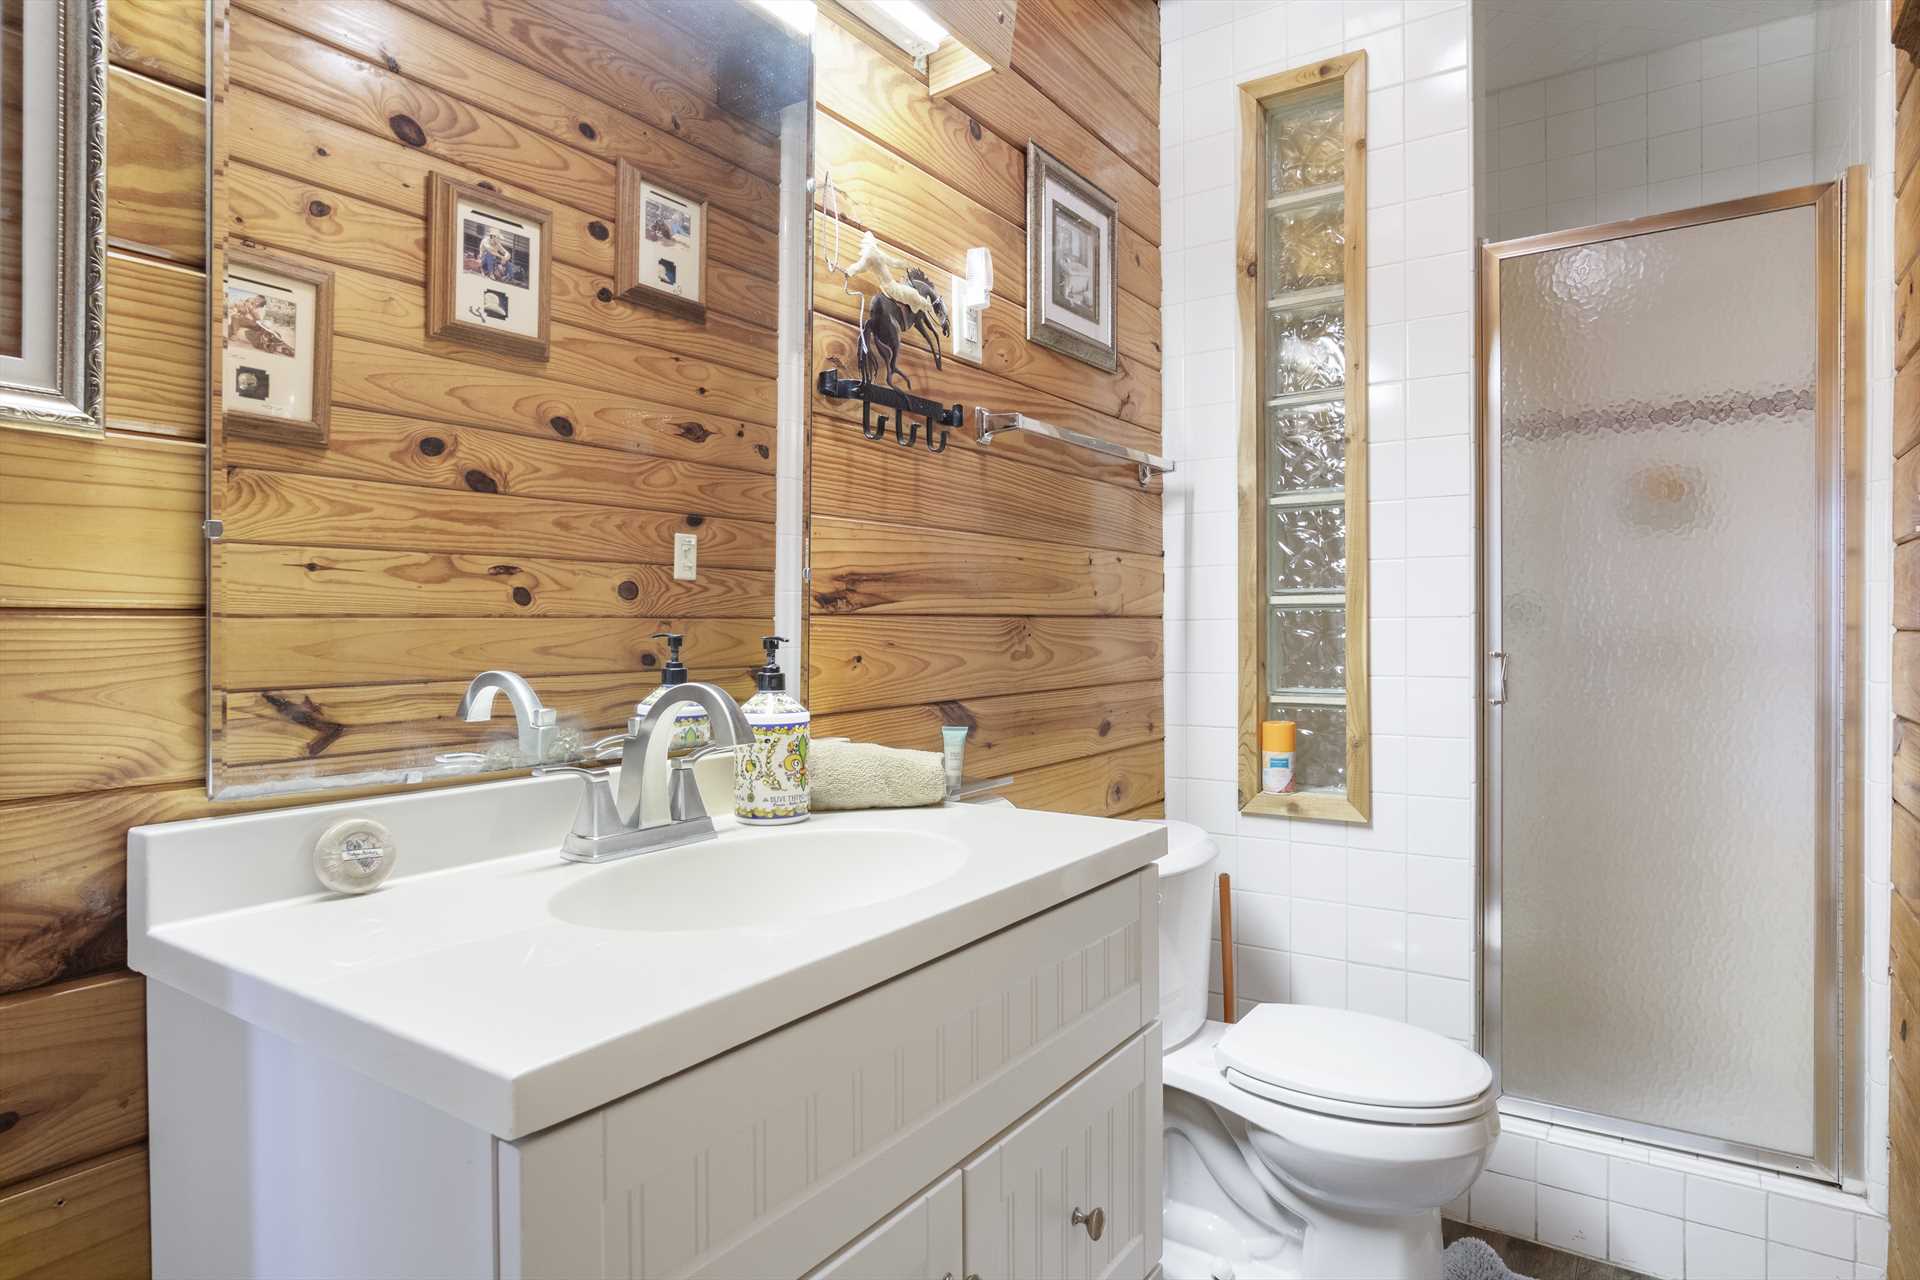                                                 A roomy vanity, shower stall, and clean and fluffy linens are all included in the full bath.